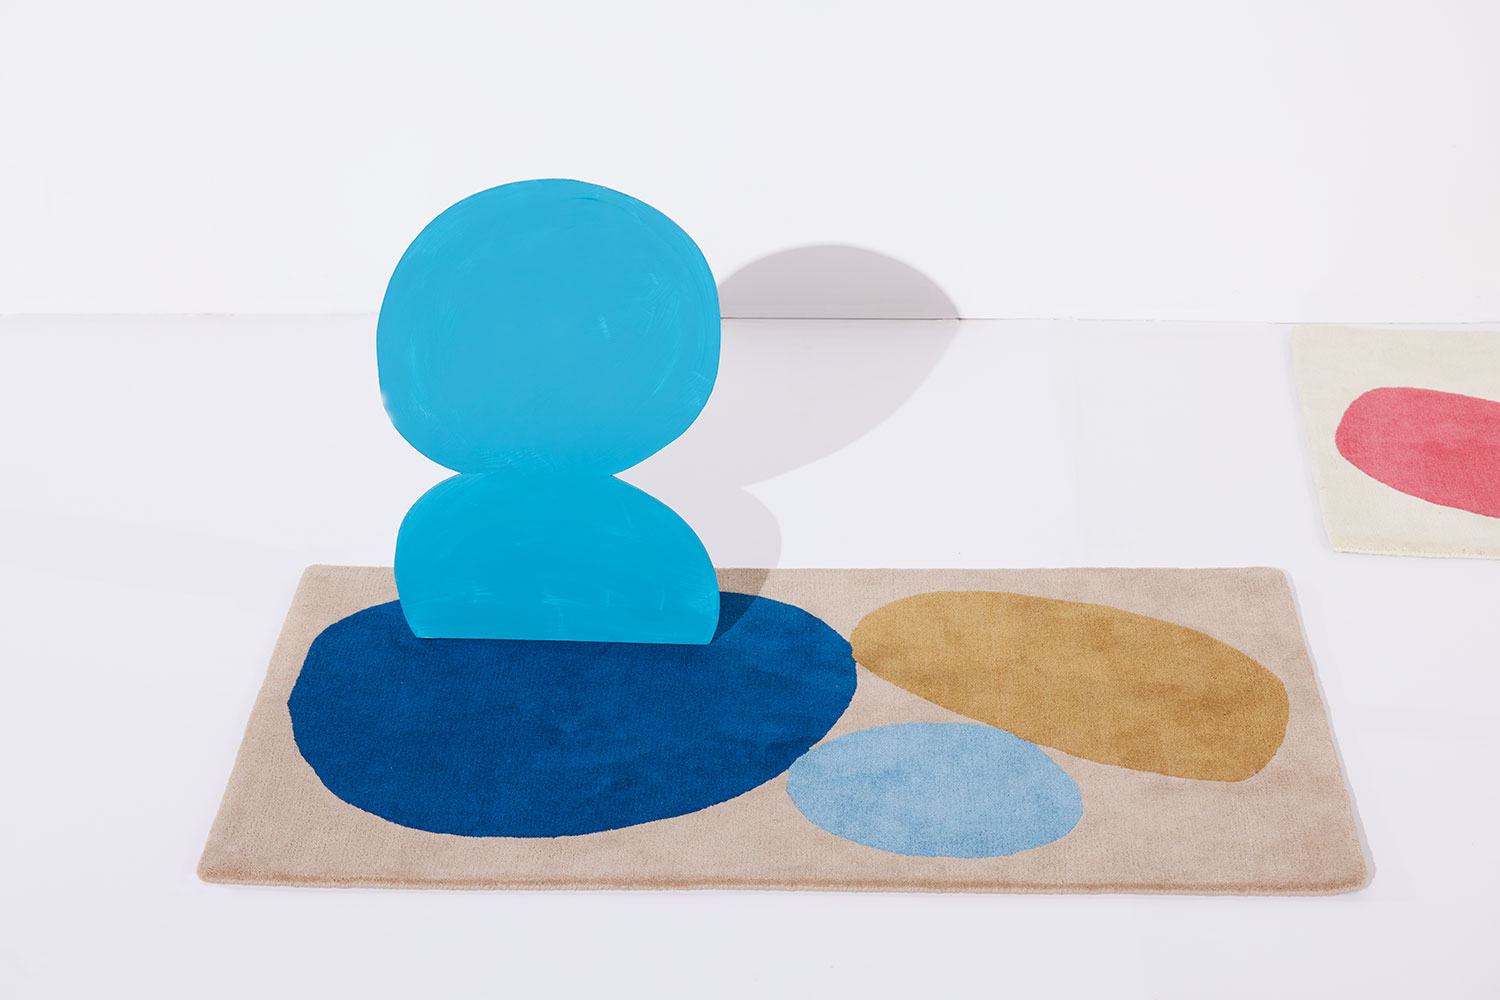 A 3 foot by 5 foot modern rug called Three Stones Sand with a blue shape and silhouette on top